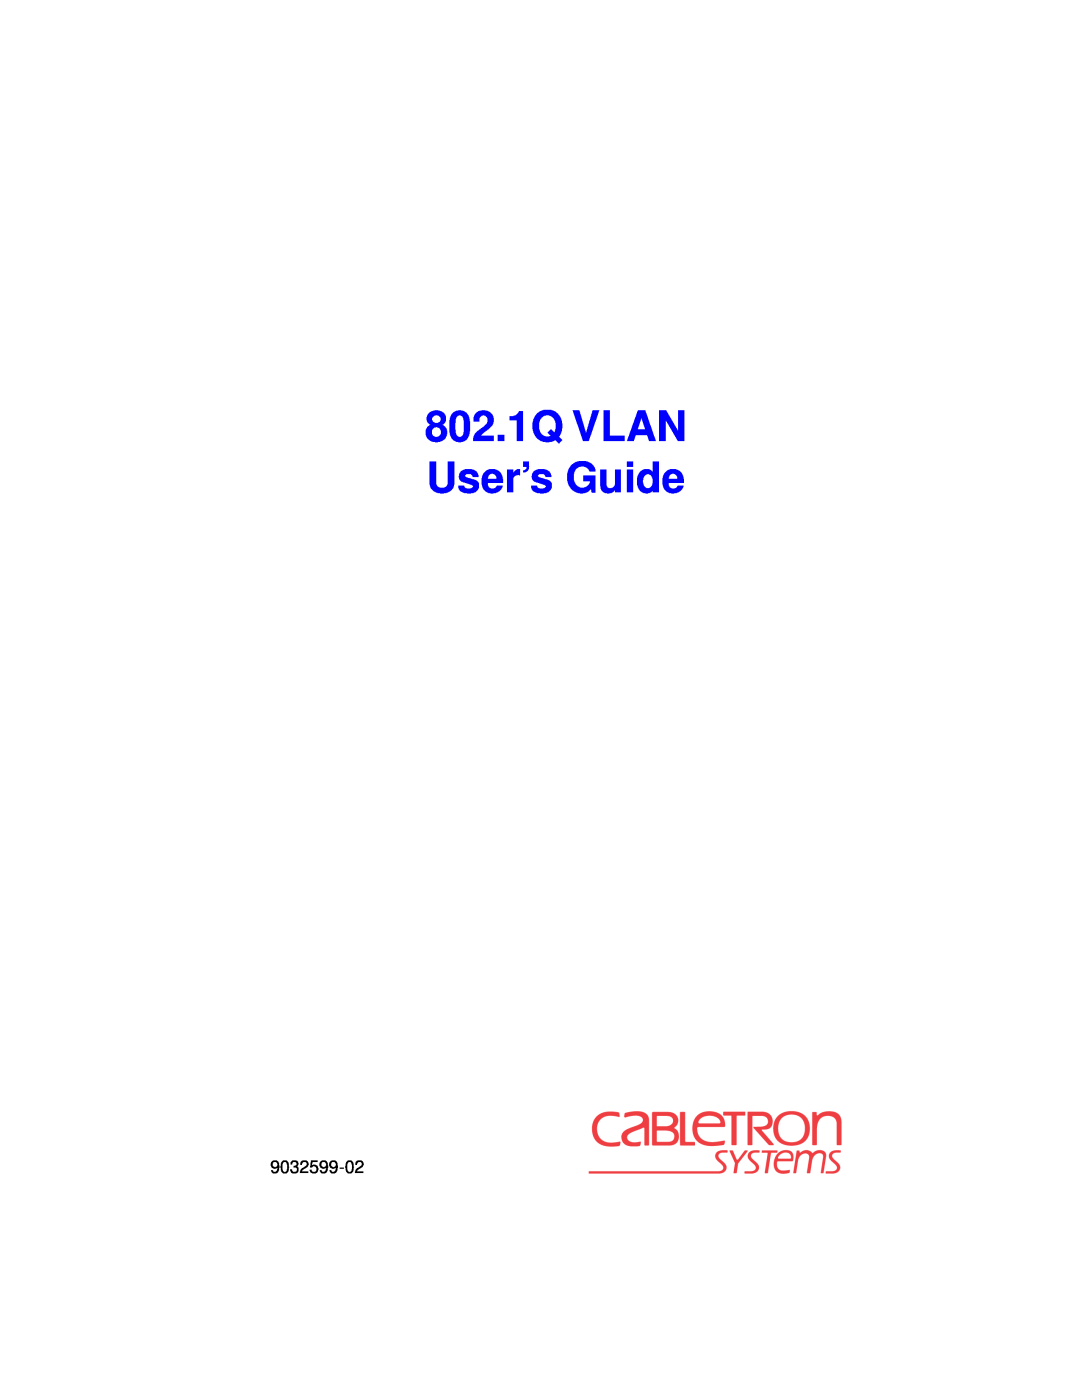 Cabletron Systems manual 802.1Q VLAN User’s Guide, 9032599-02 